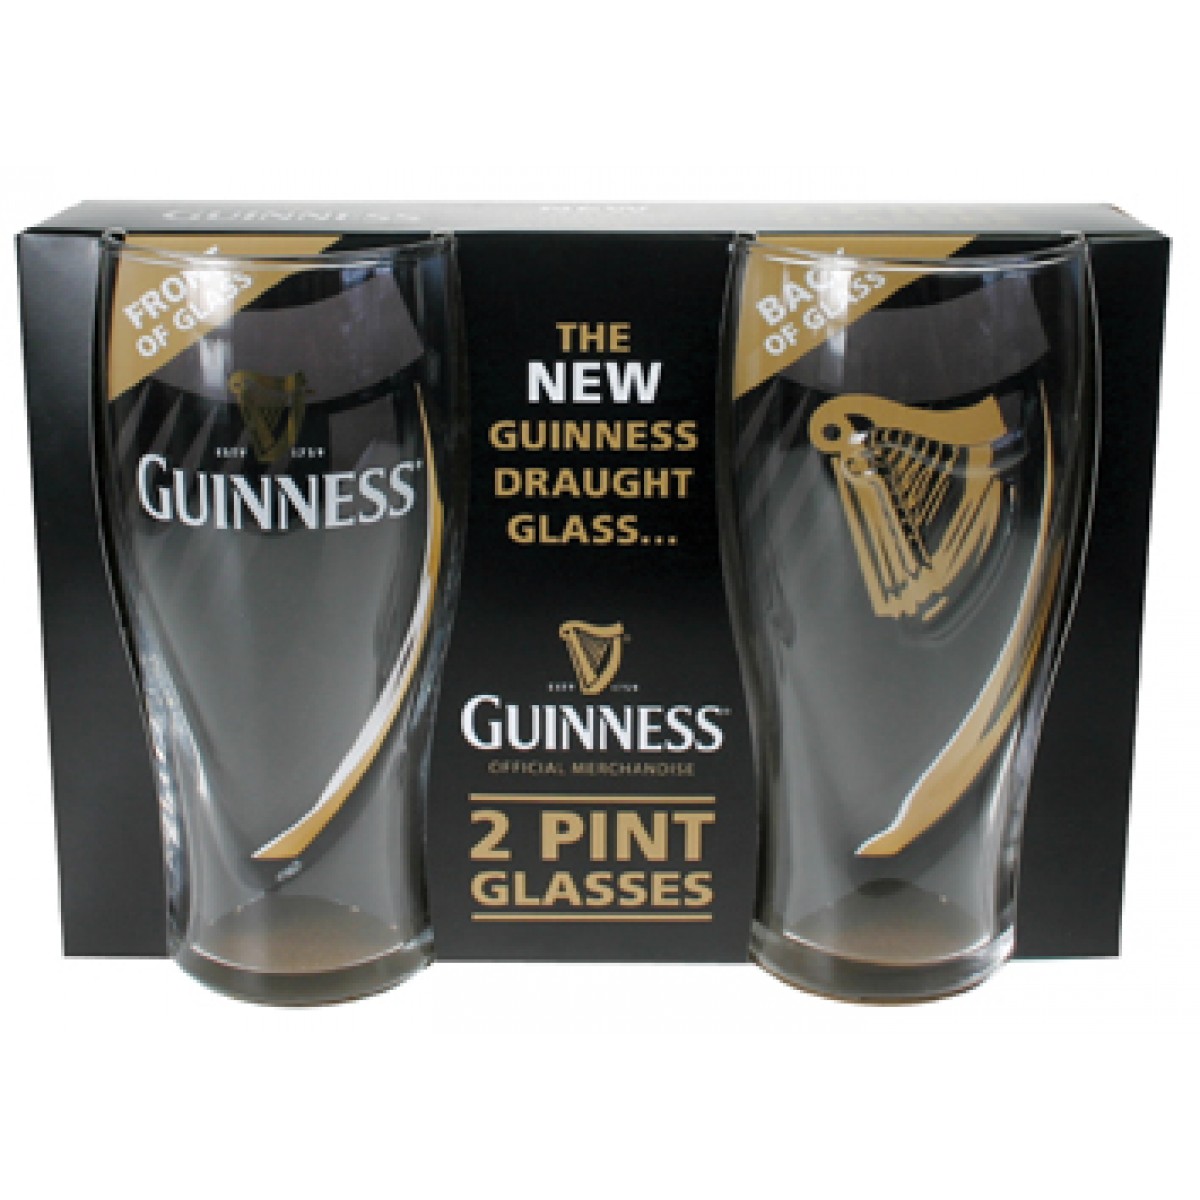 Sarah Maguire's Cottage Scents & GiftsGuinness Green Label Pint Glass Set